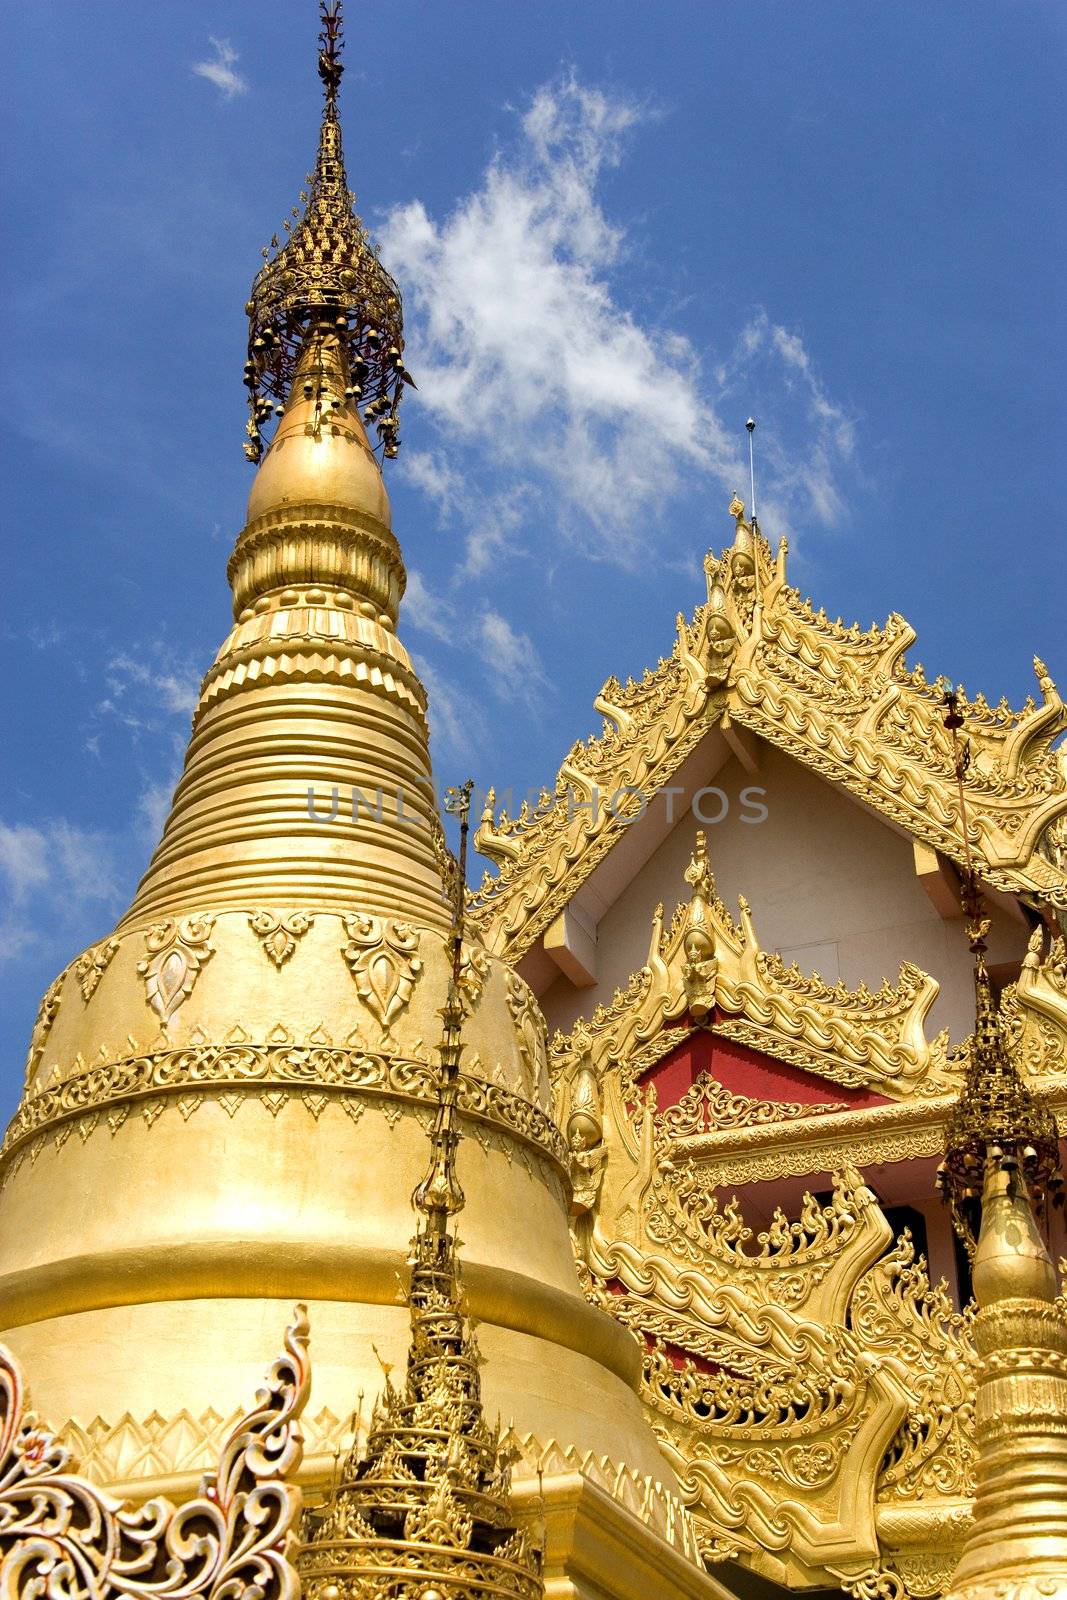 Image of a centuries old Burmese Buddhist temple.